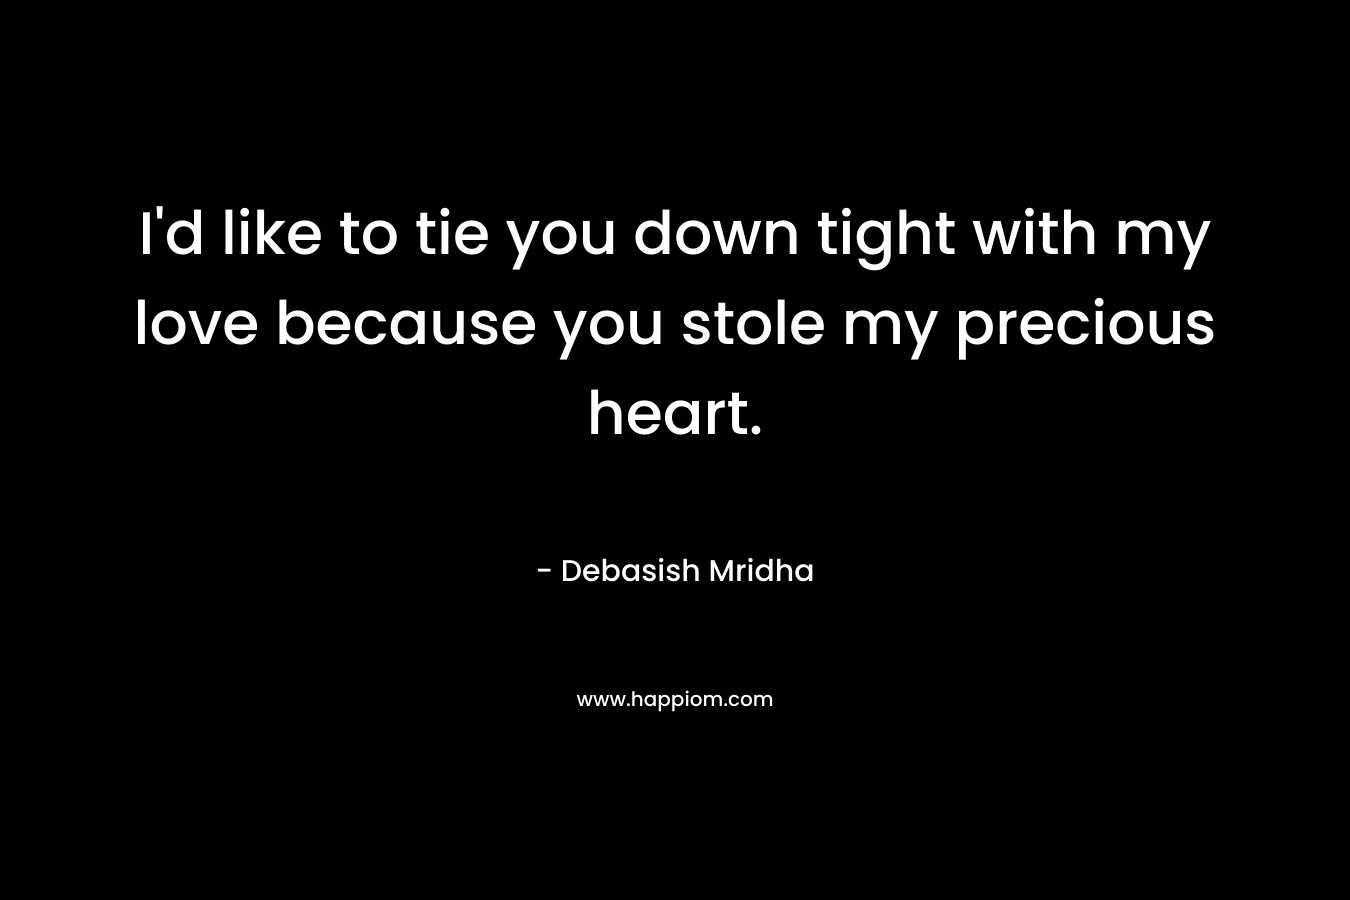 I'd like to tie you down tight with my love because you stole my precious heart.